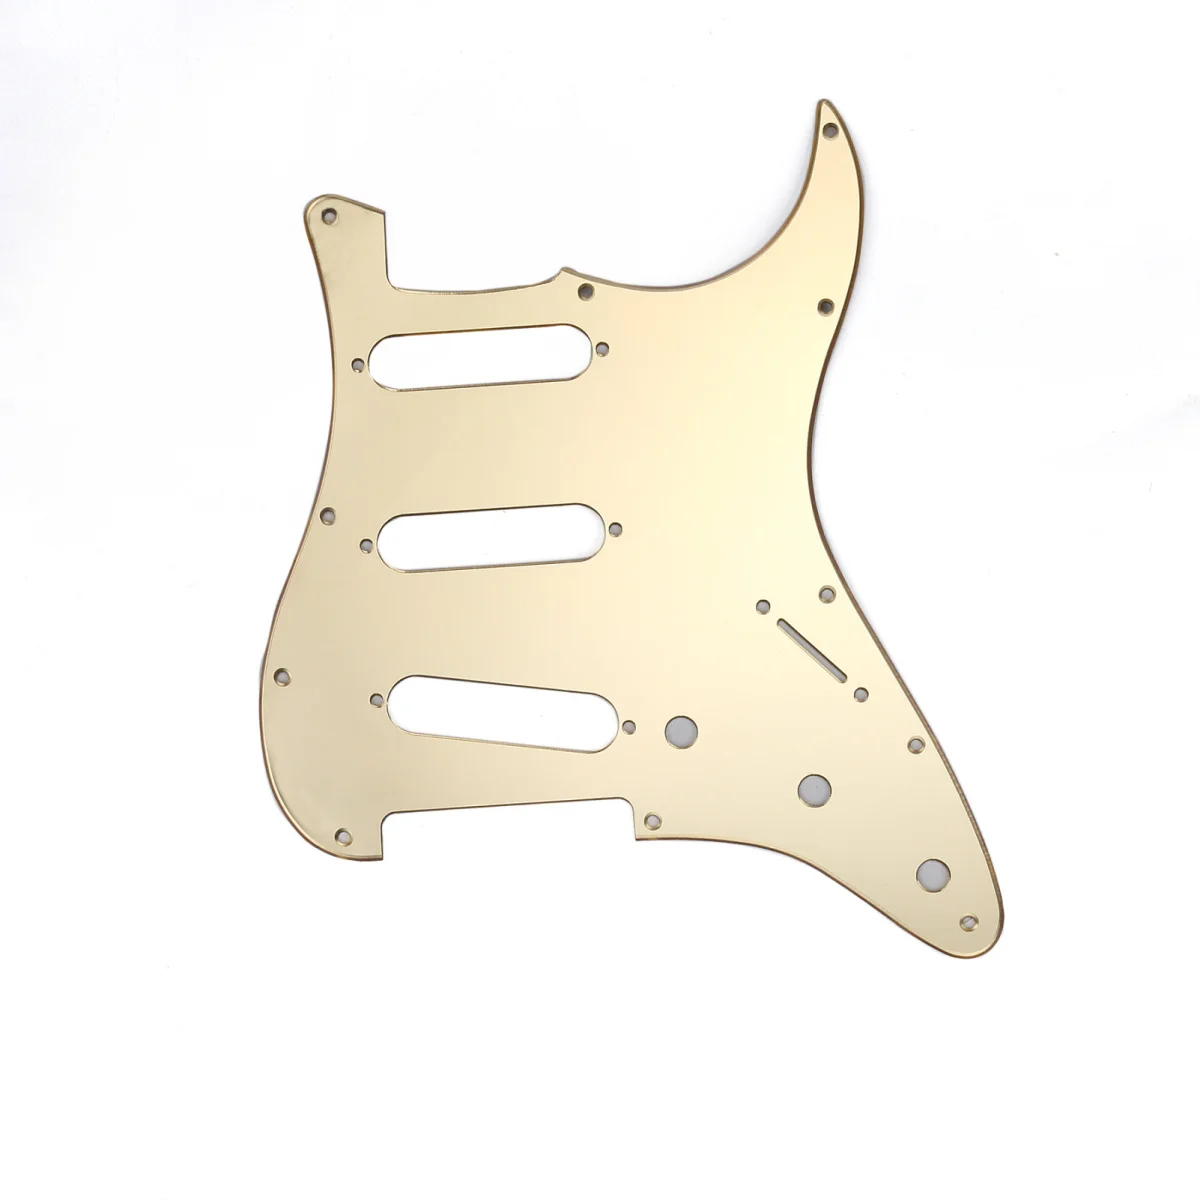 

Musiclily SSS 11 Hole Strat Guitar Pickguard for Fender USA/Mexican Made Standard Stratocaster Style, 1Ply Gold Mirror Acrylic